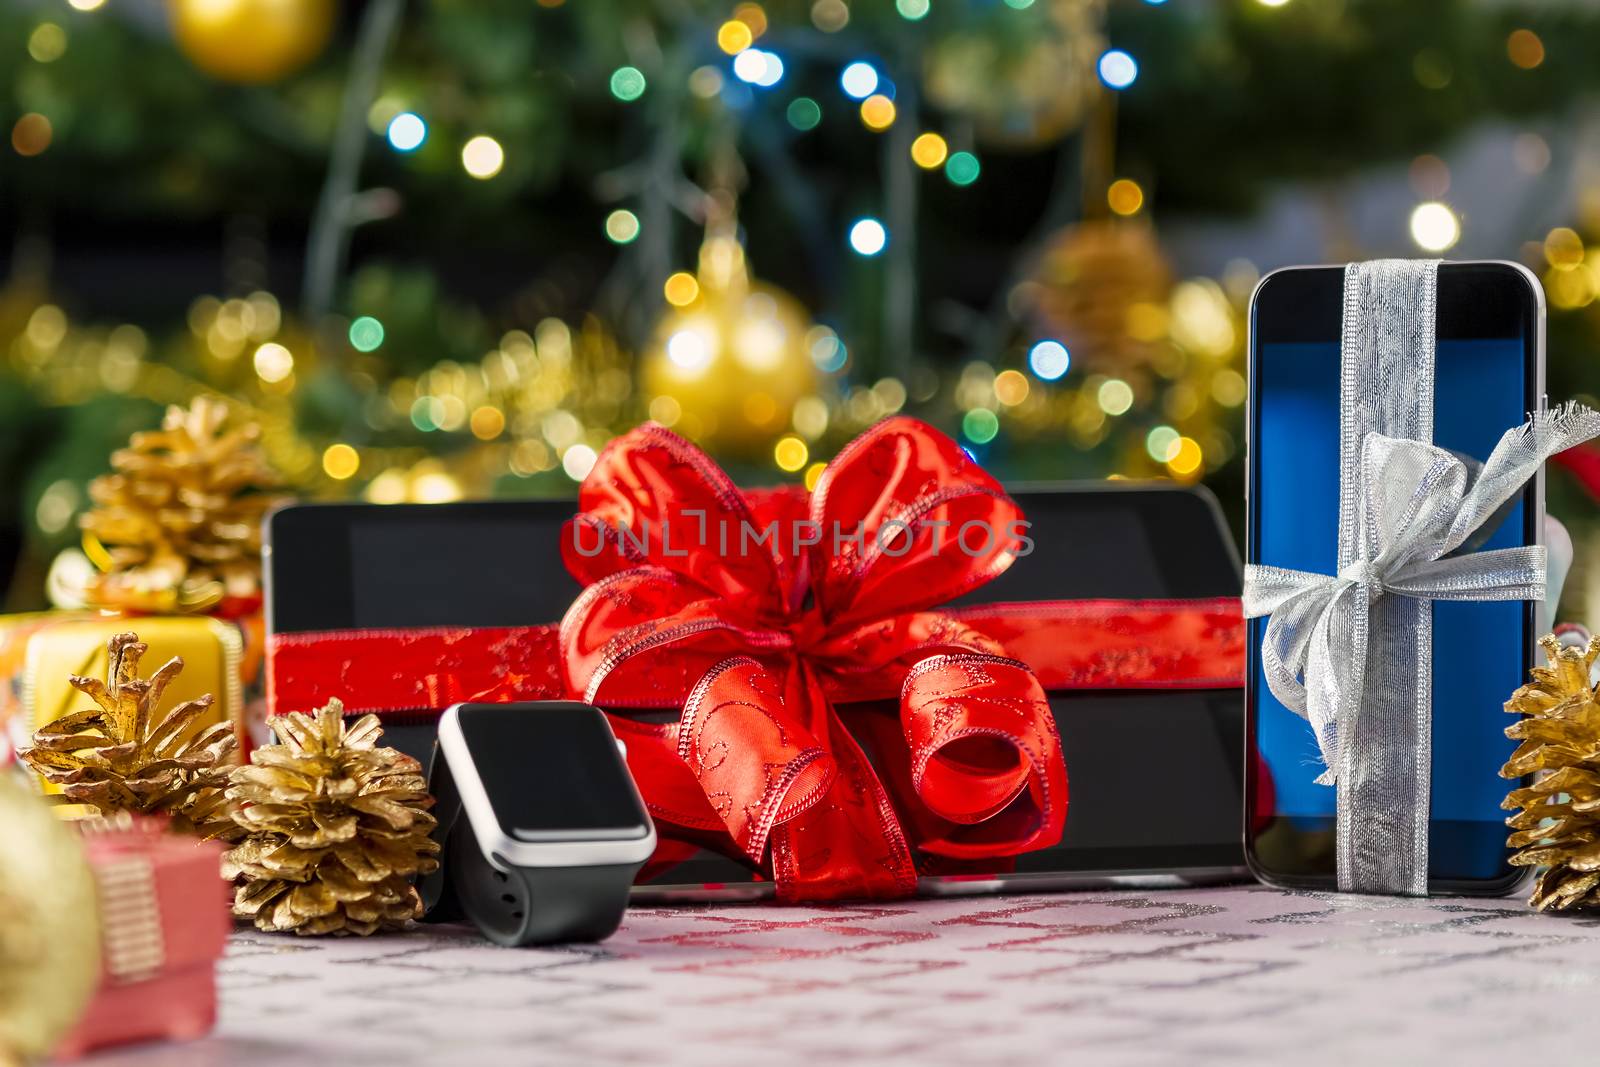 Tablet pc, smartphone and smartwatch with gifts and decorations in front of Christmas tree. Focus on smartphone.